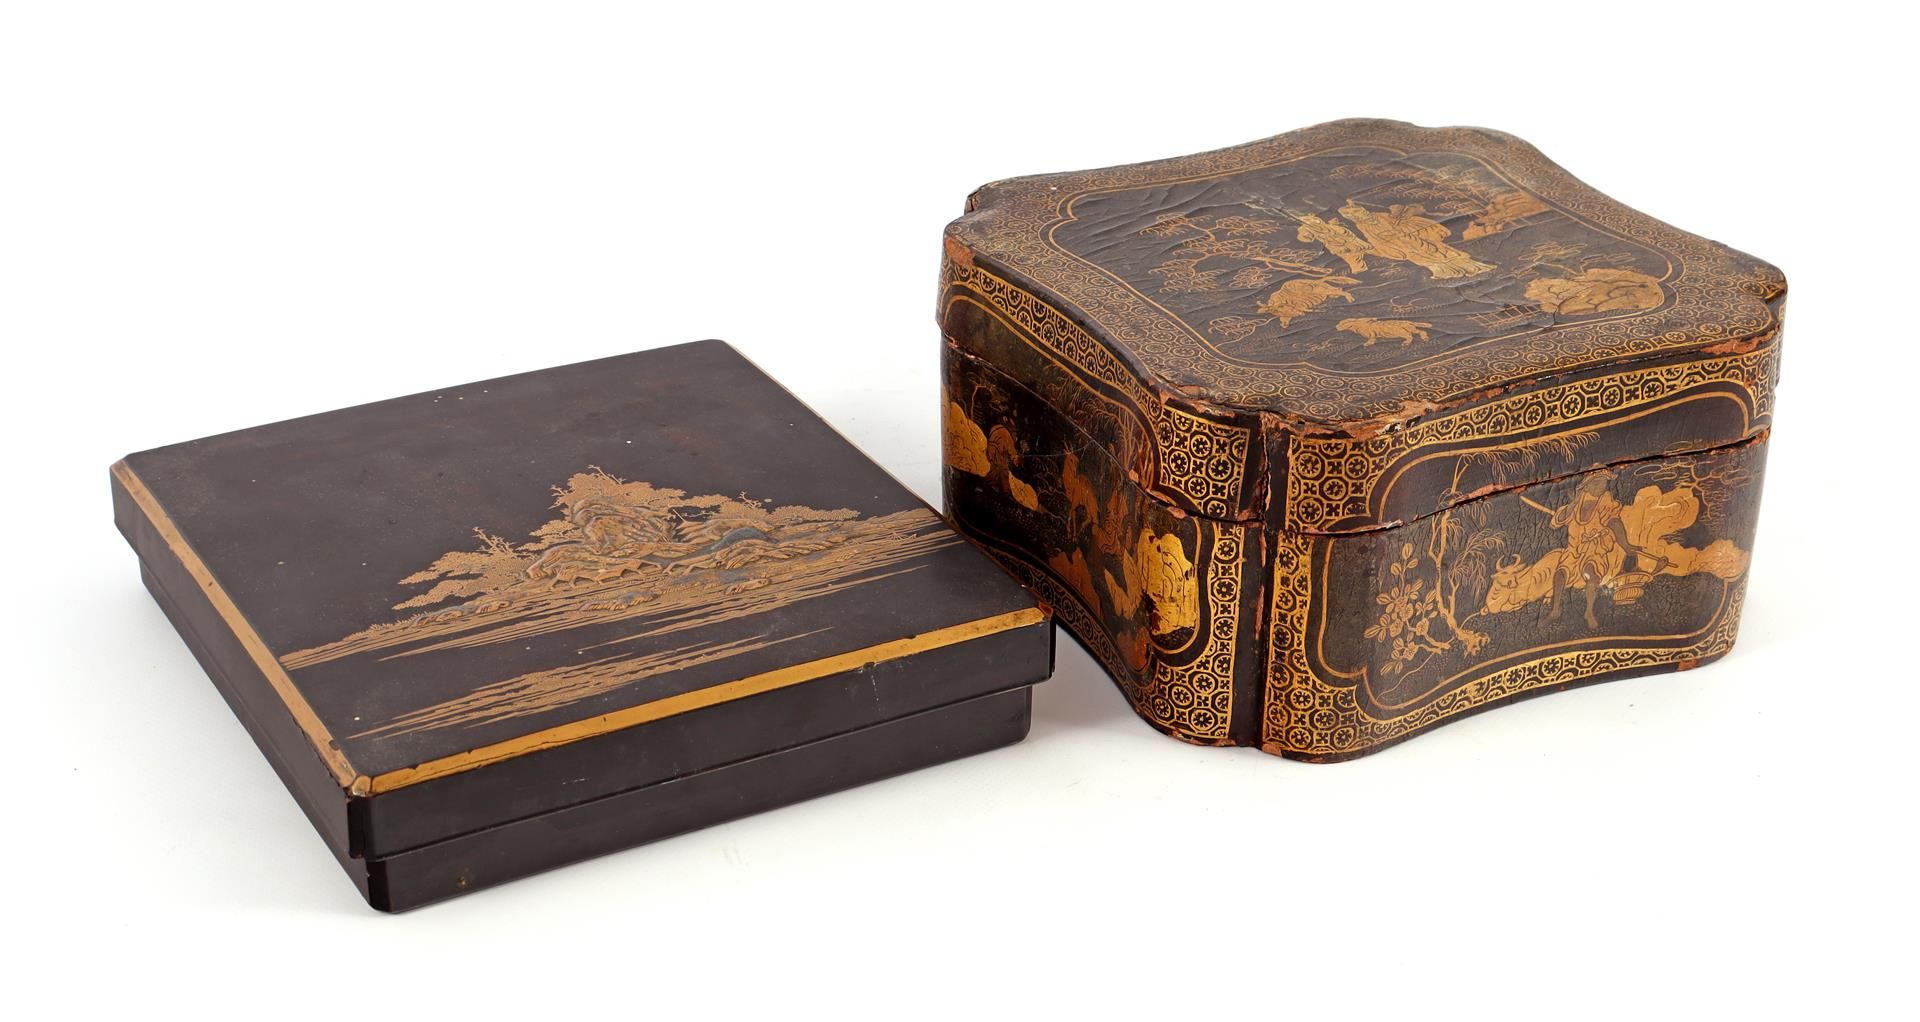 Chinese lacquer box with decoration in gold leaf